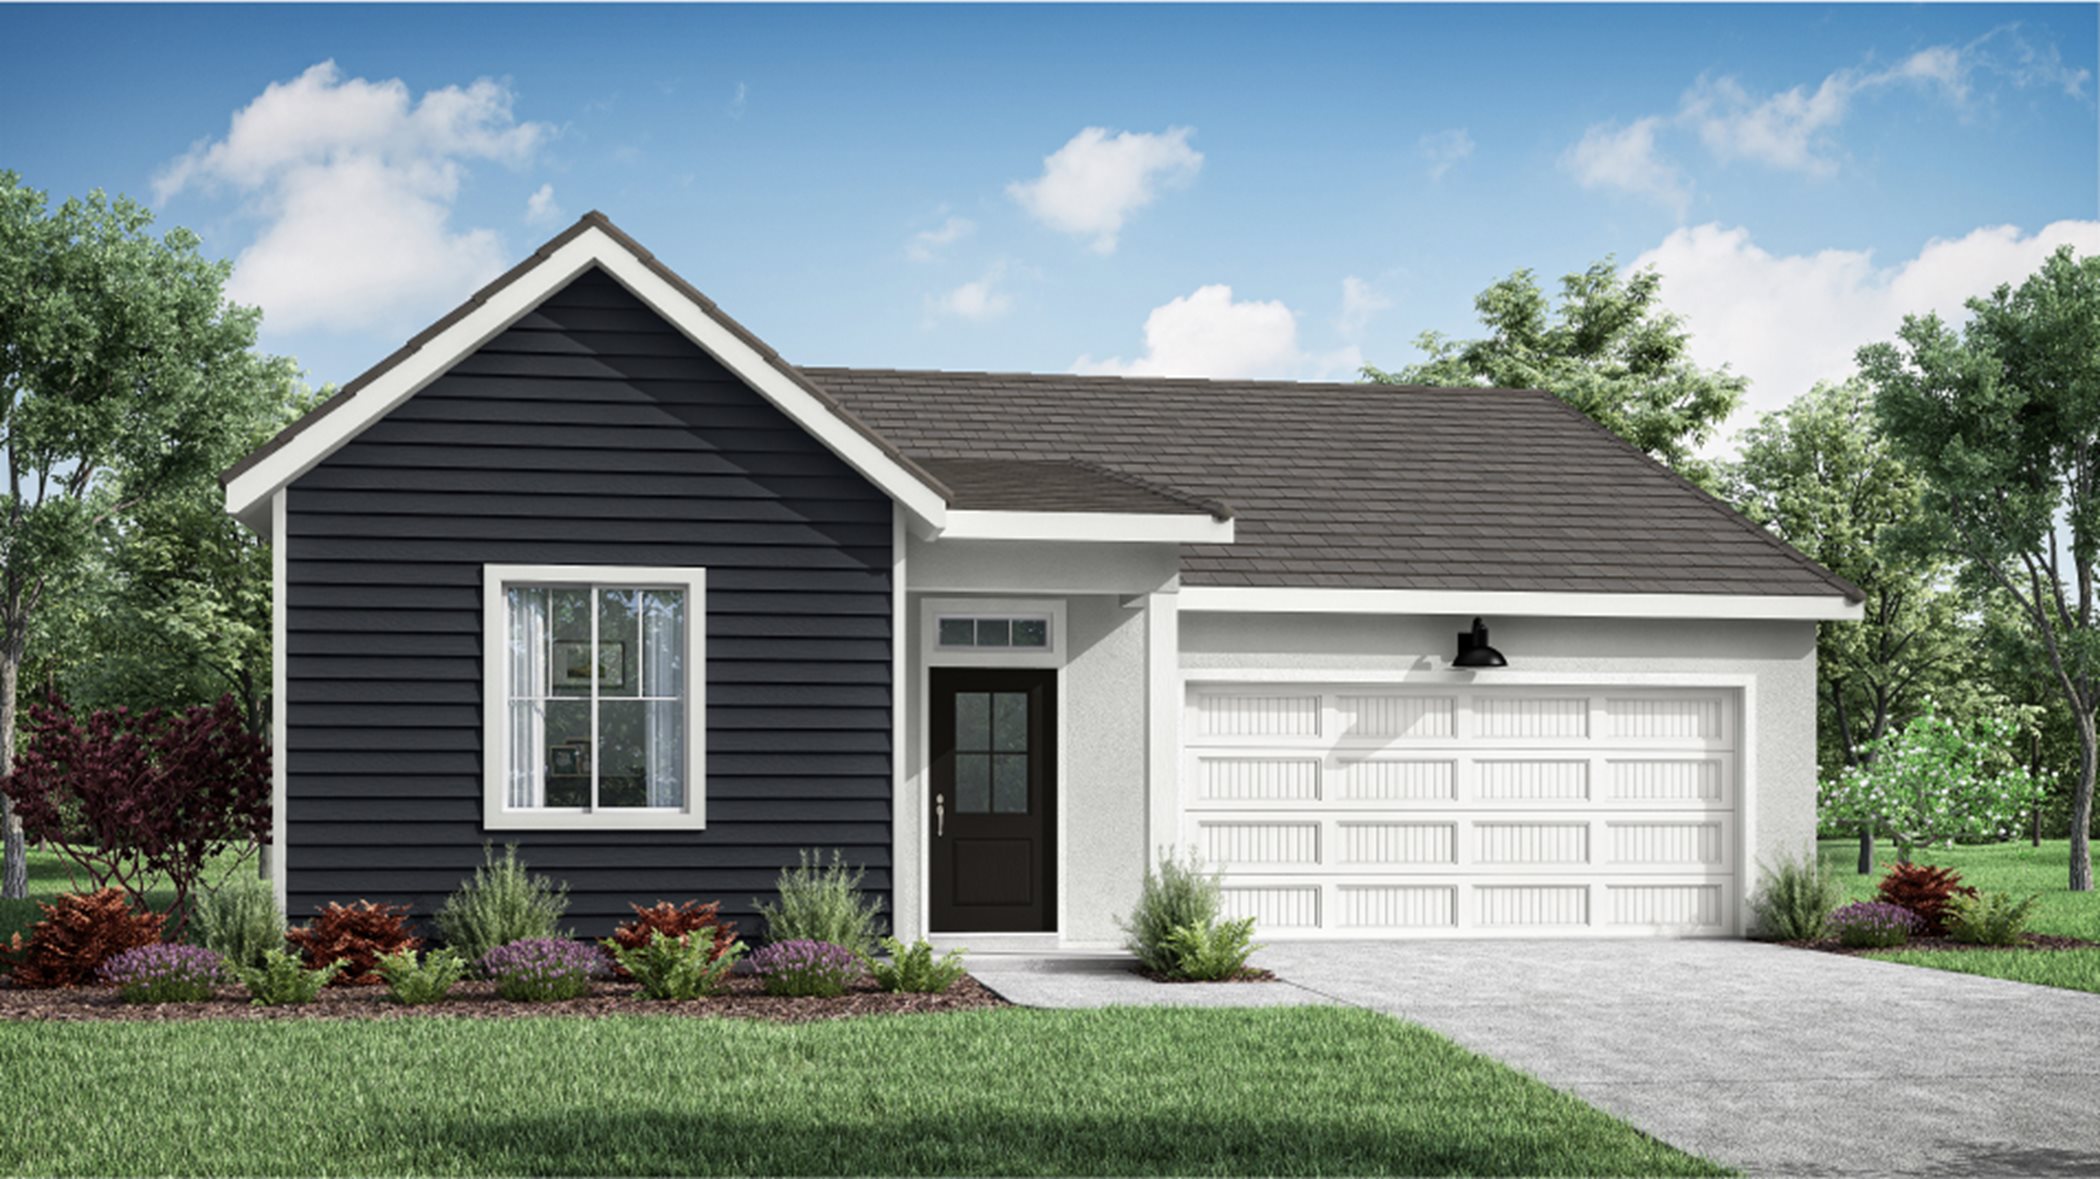 Exterior A home rendering image